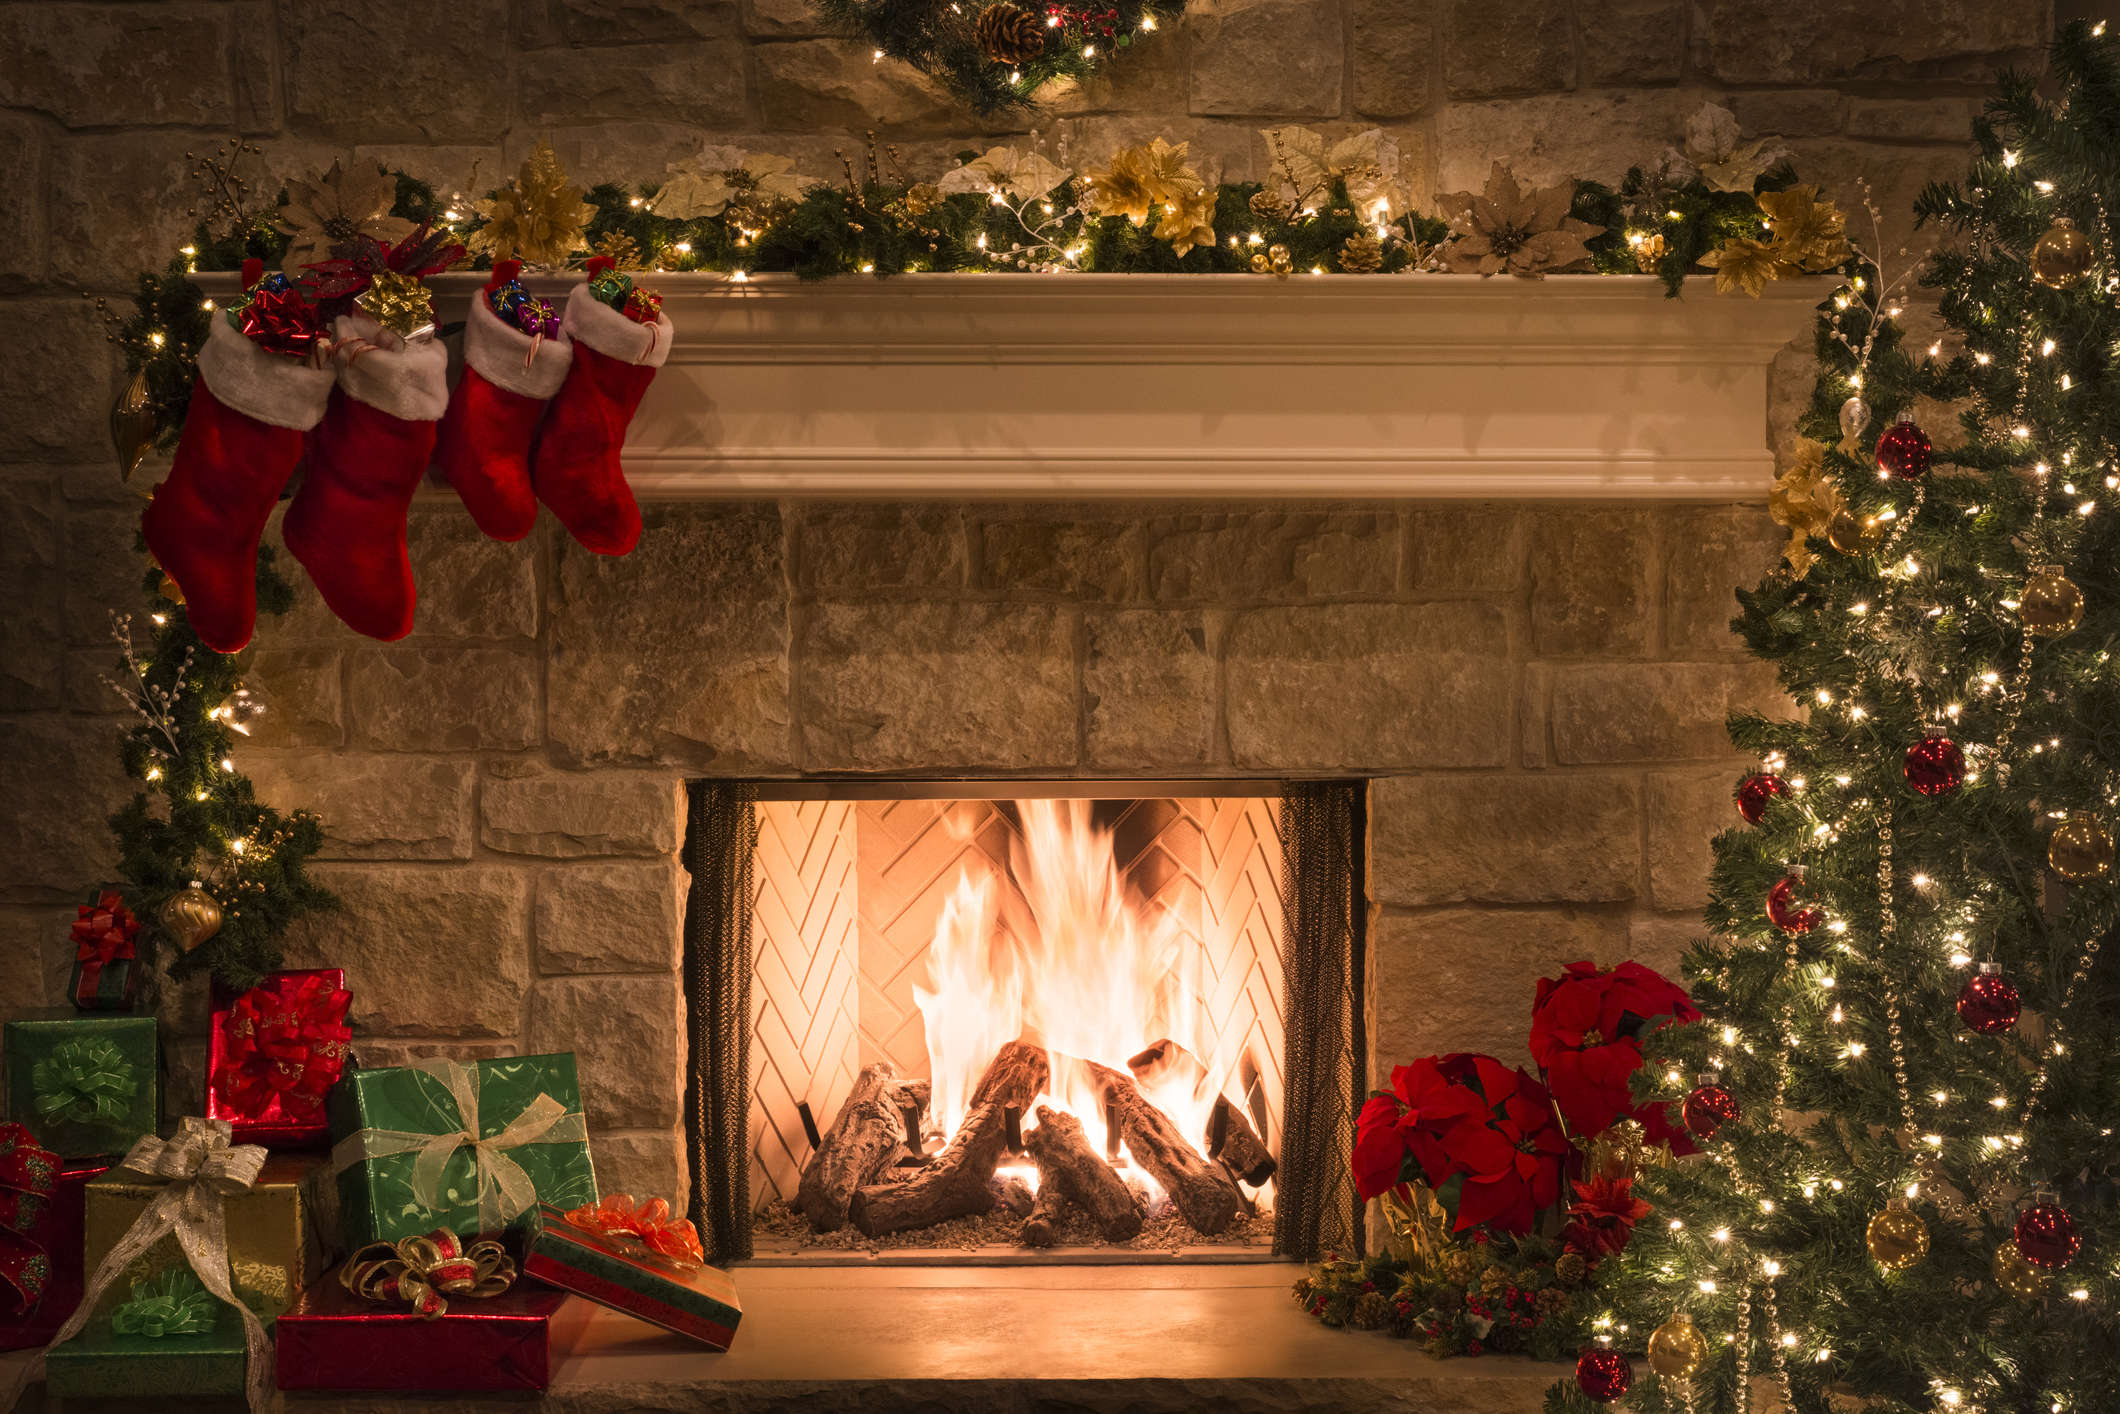 Christmas fireplace, stockings, gifts, tree, copy space  Lisa Lisson